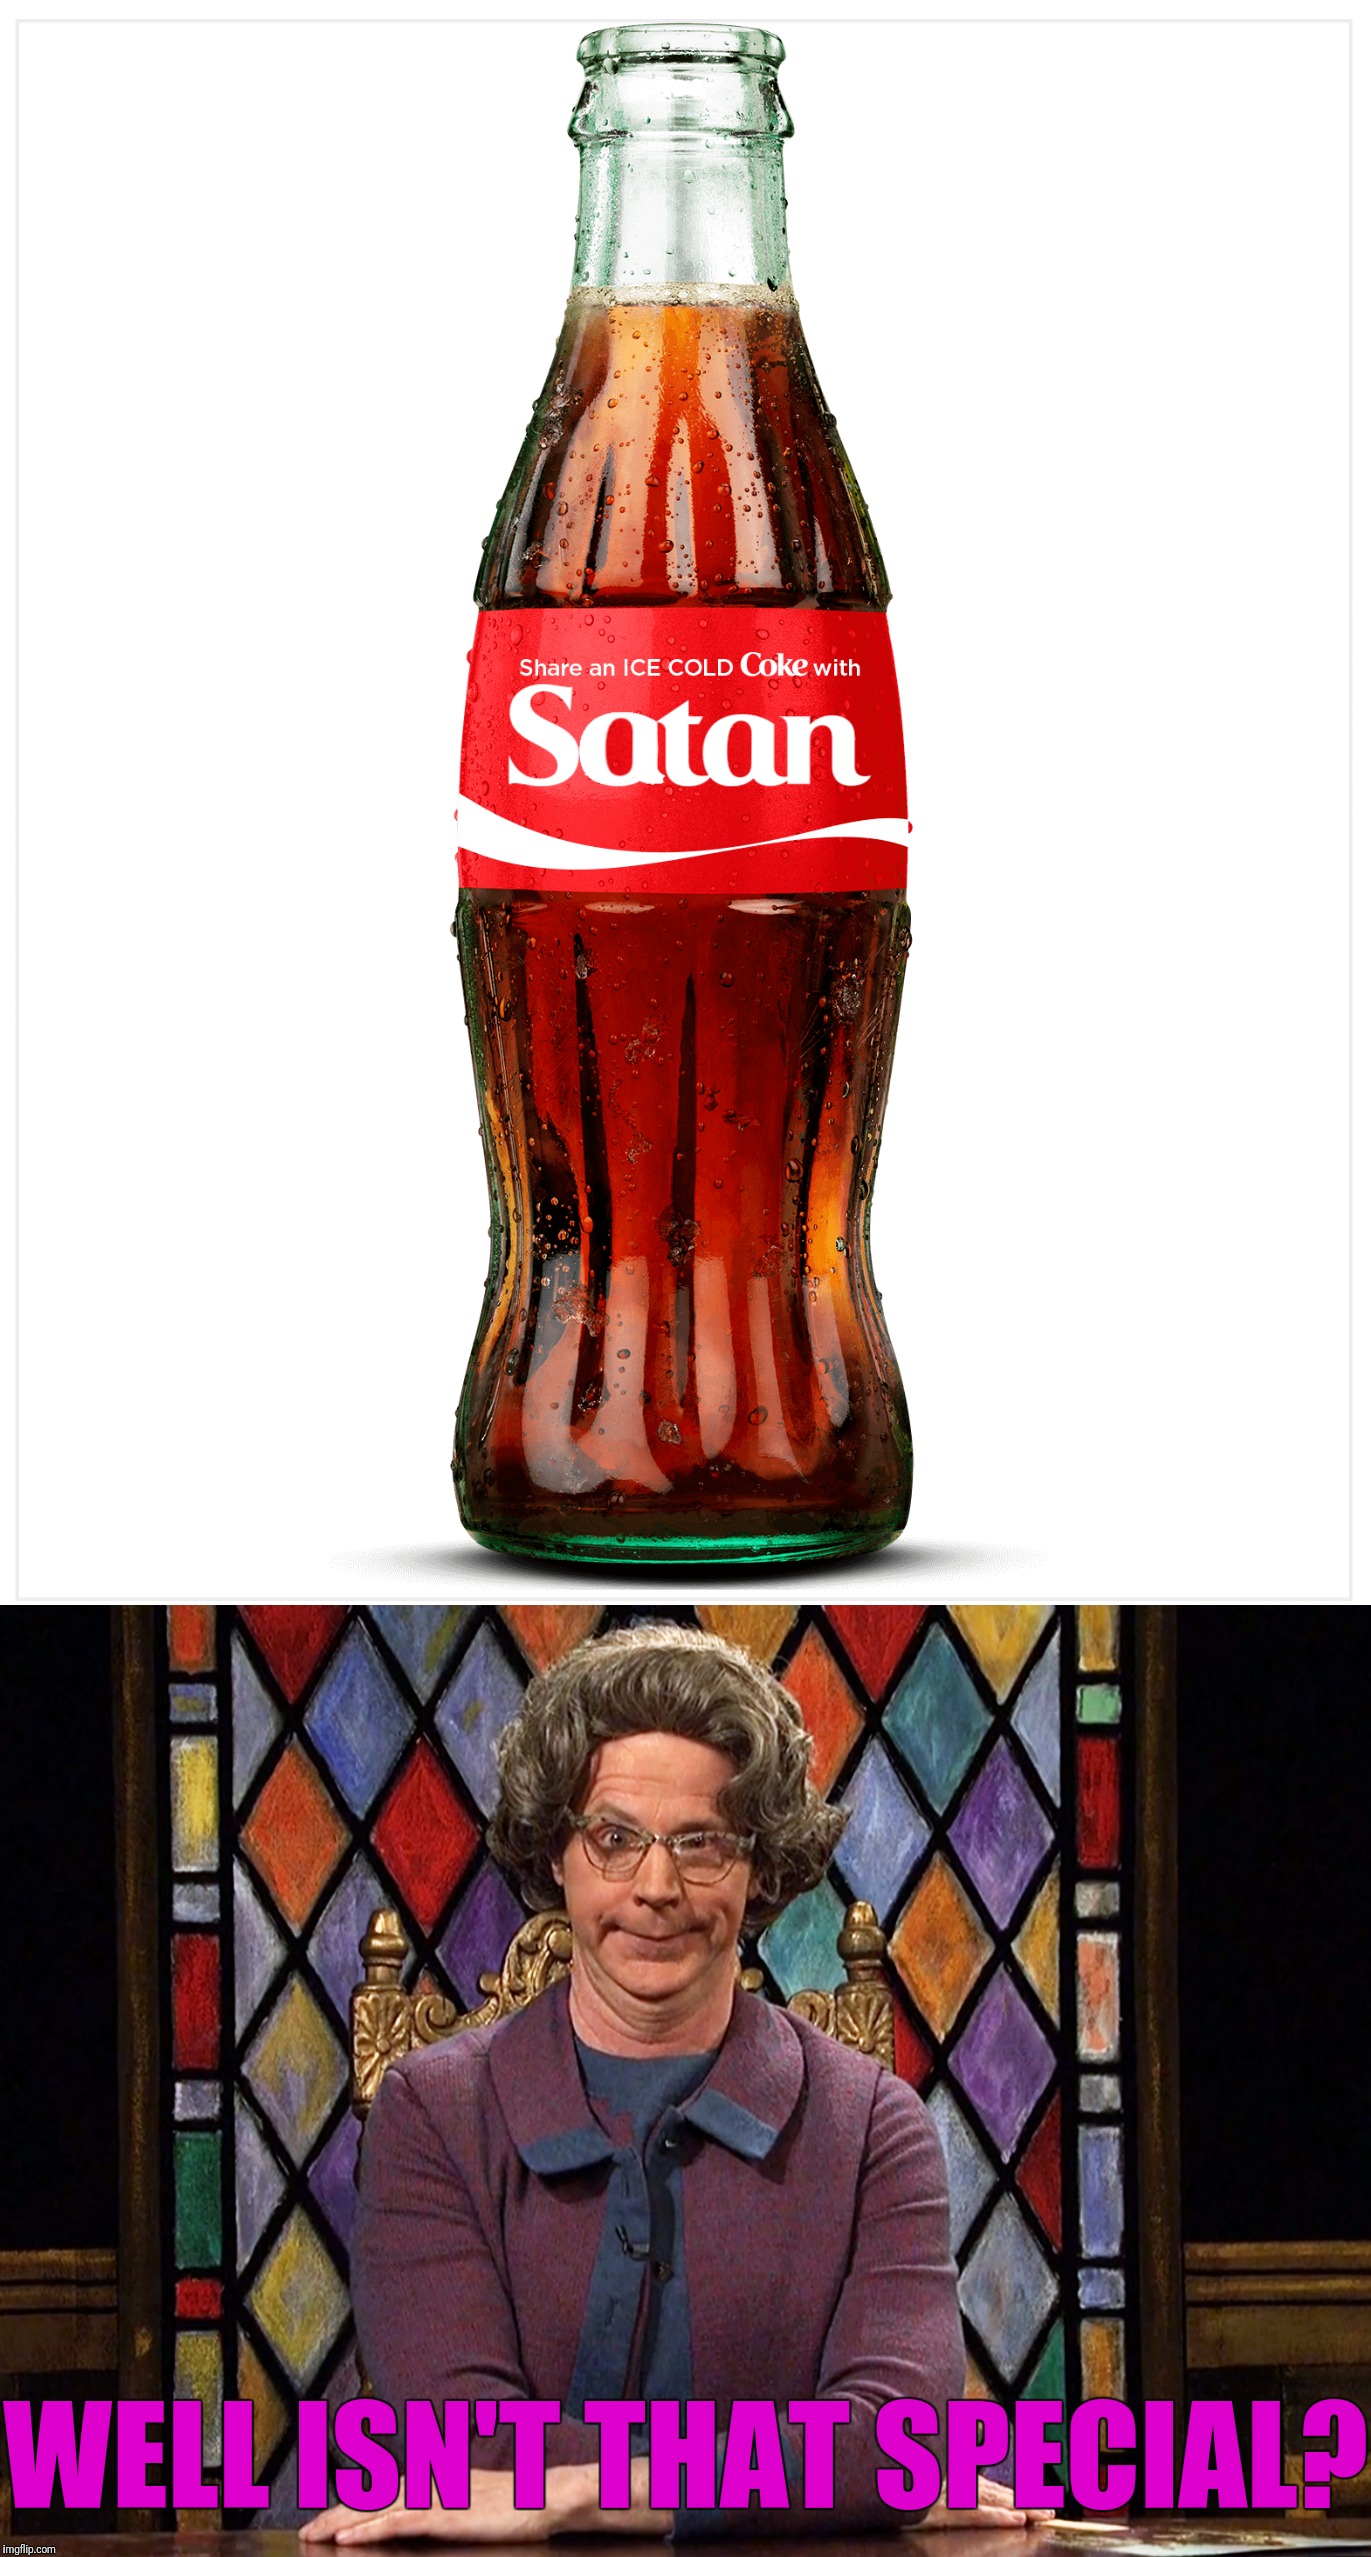 Share a Coke with Church Lady | WELL ISN'T THAT SPECIAL? | image tagged in memes,snl,share a coke with,church lady,satan | made w/ Imgflip meme maker